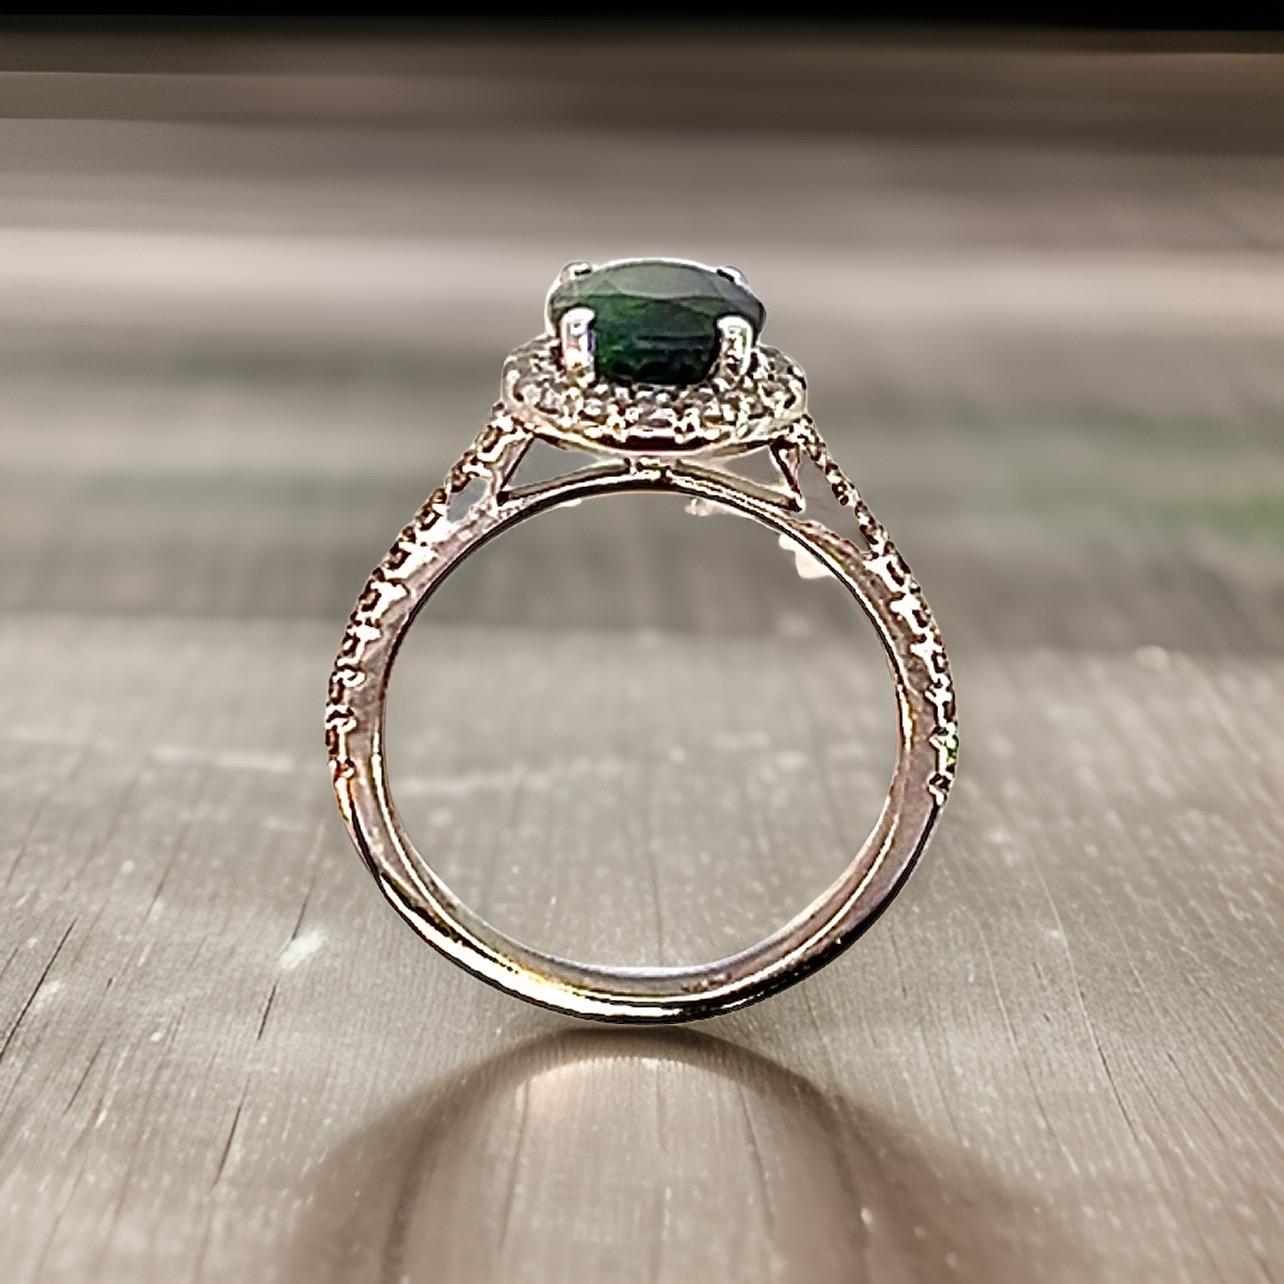 Natural Emerald Diamond Ring 6.5 14k White Gold 9.31 TCW Certified For Sale 2